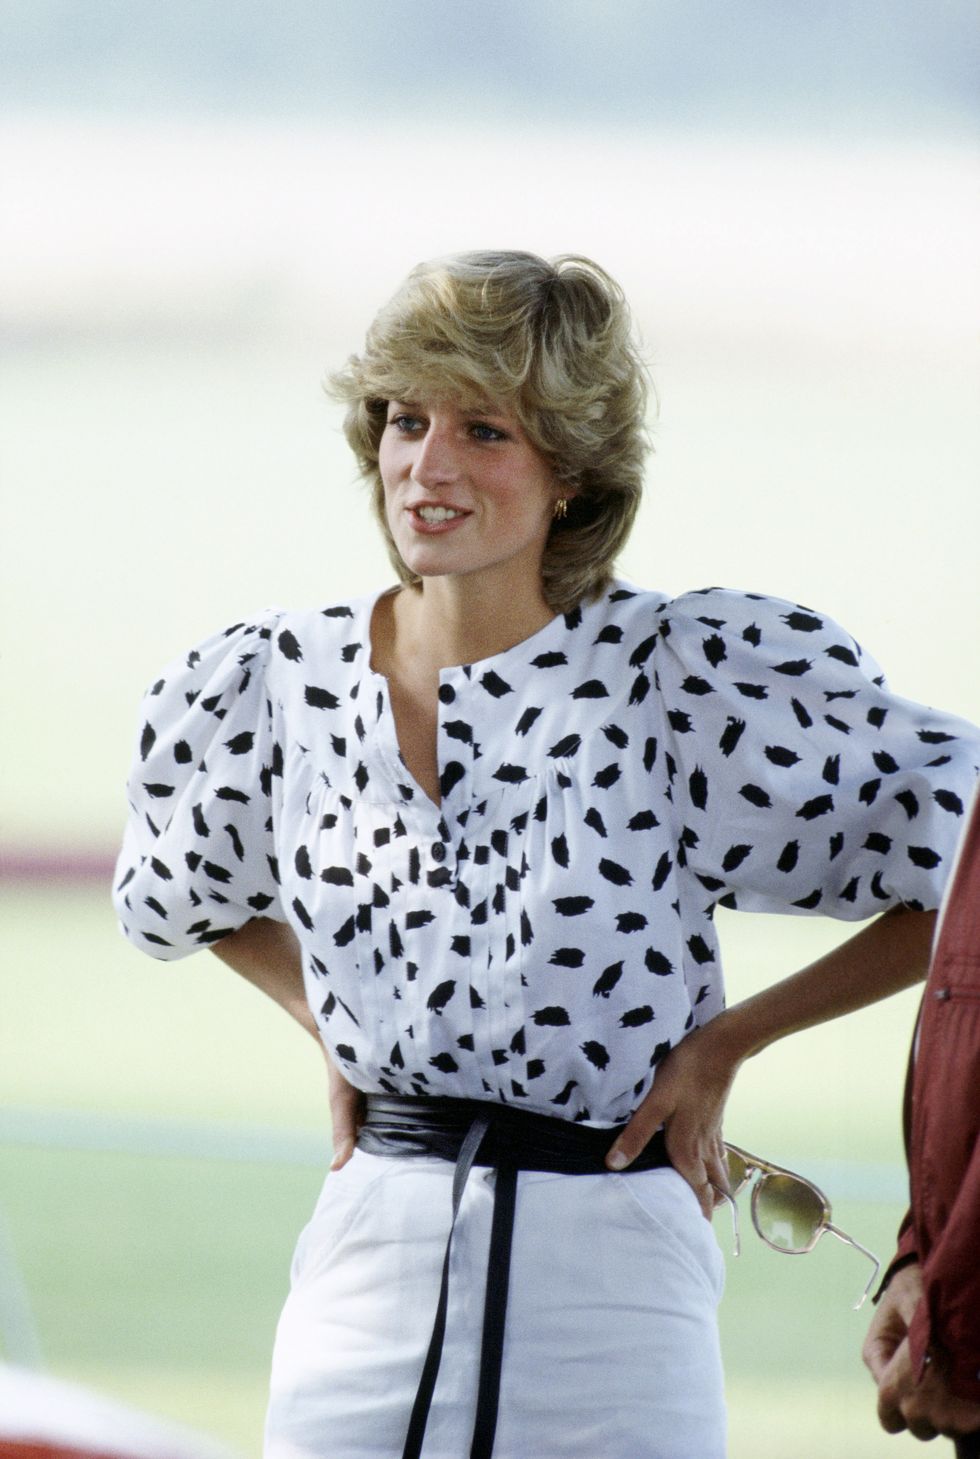 cirencester, united kingdom   august 09  princess diana watching a polo match in cirencester  photo by tim graham photo library via getty images